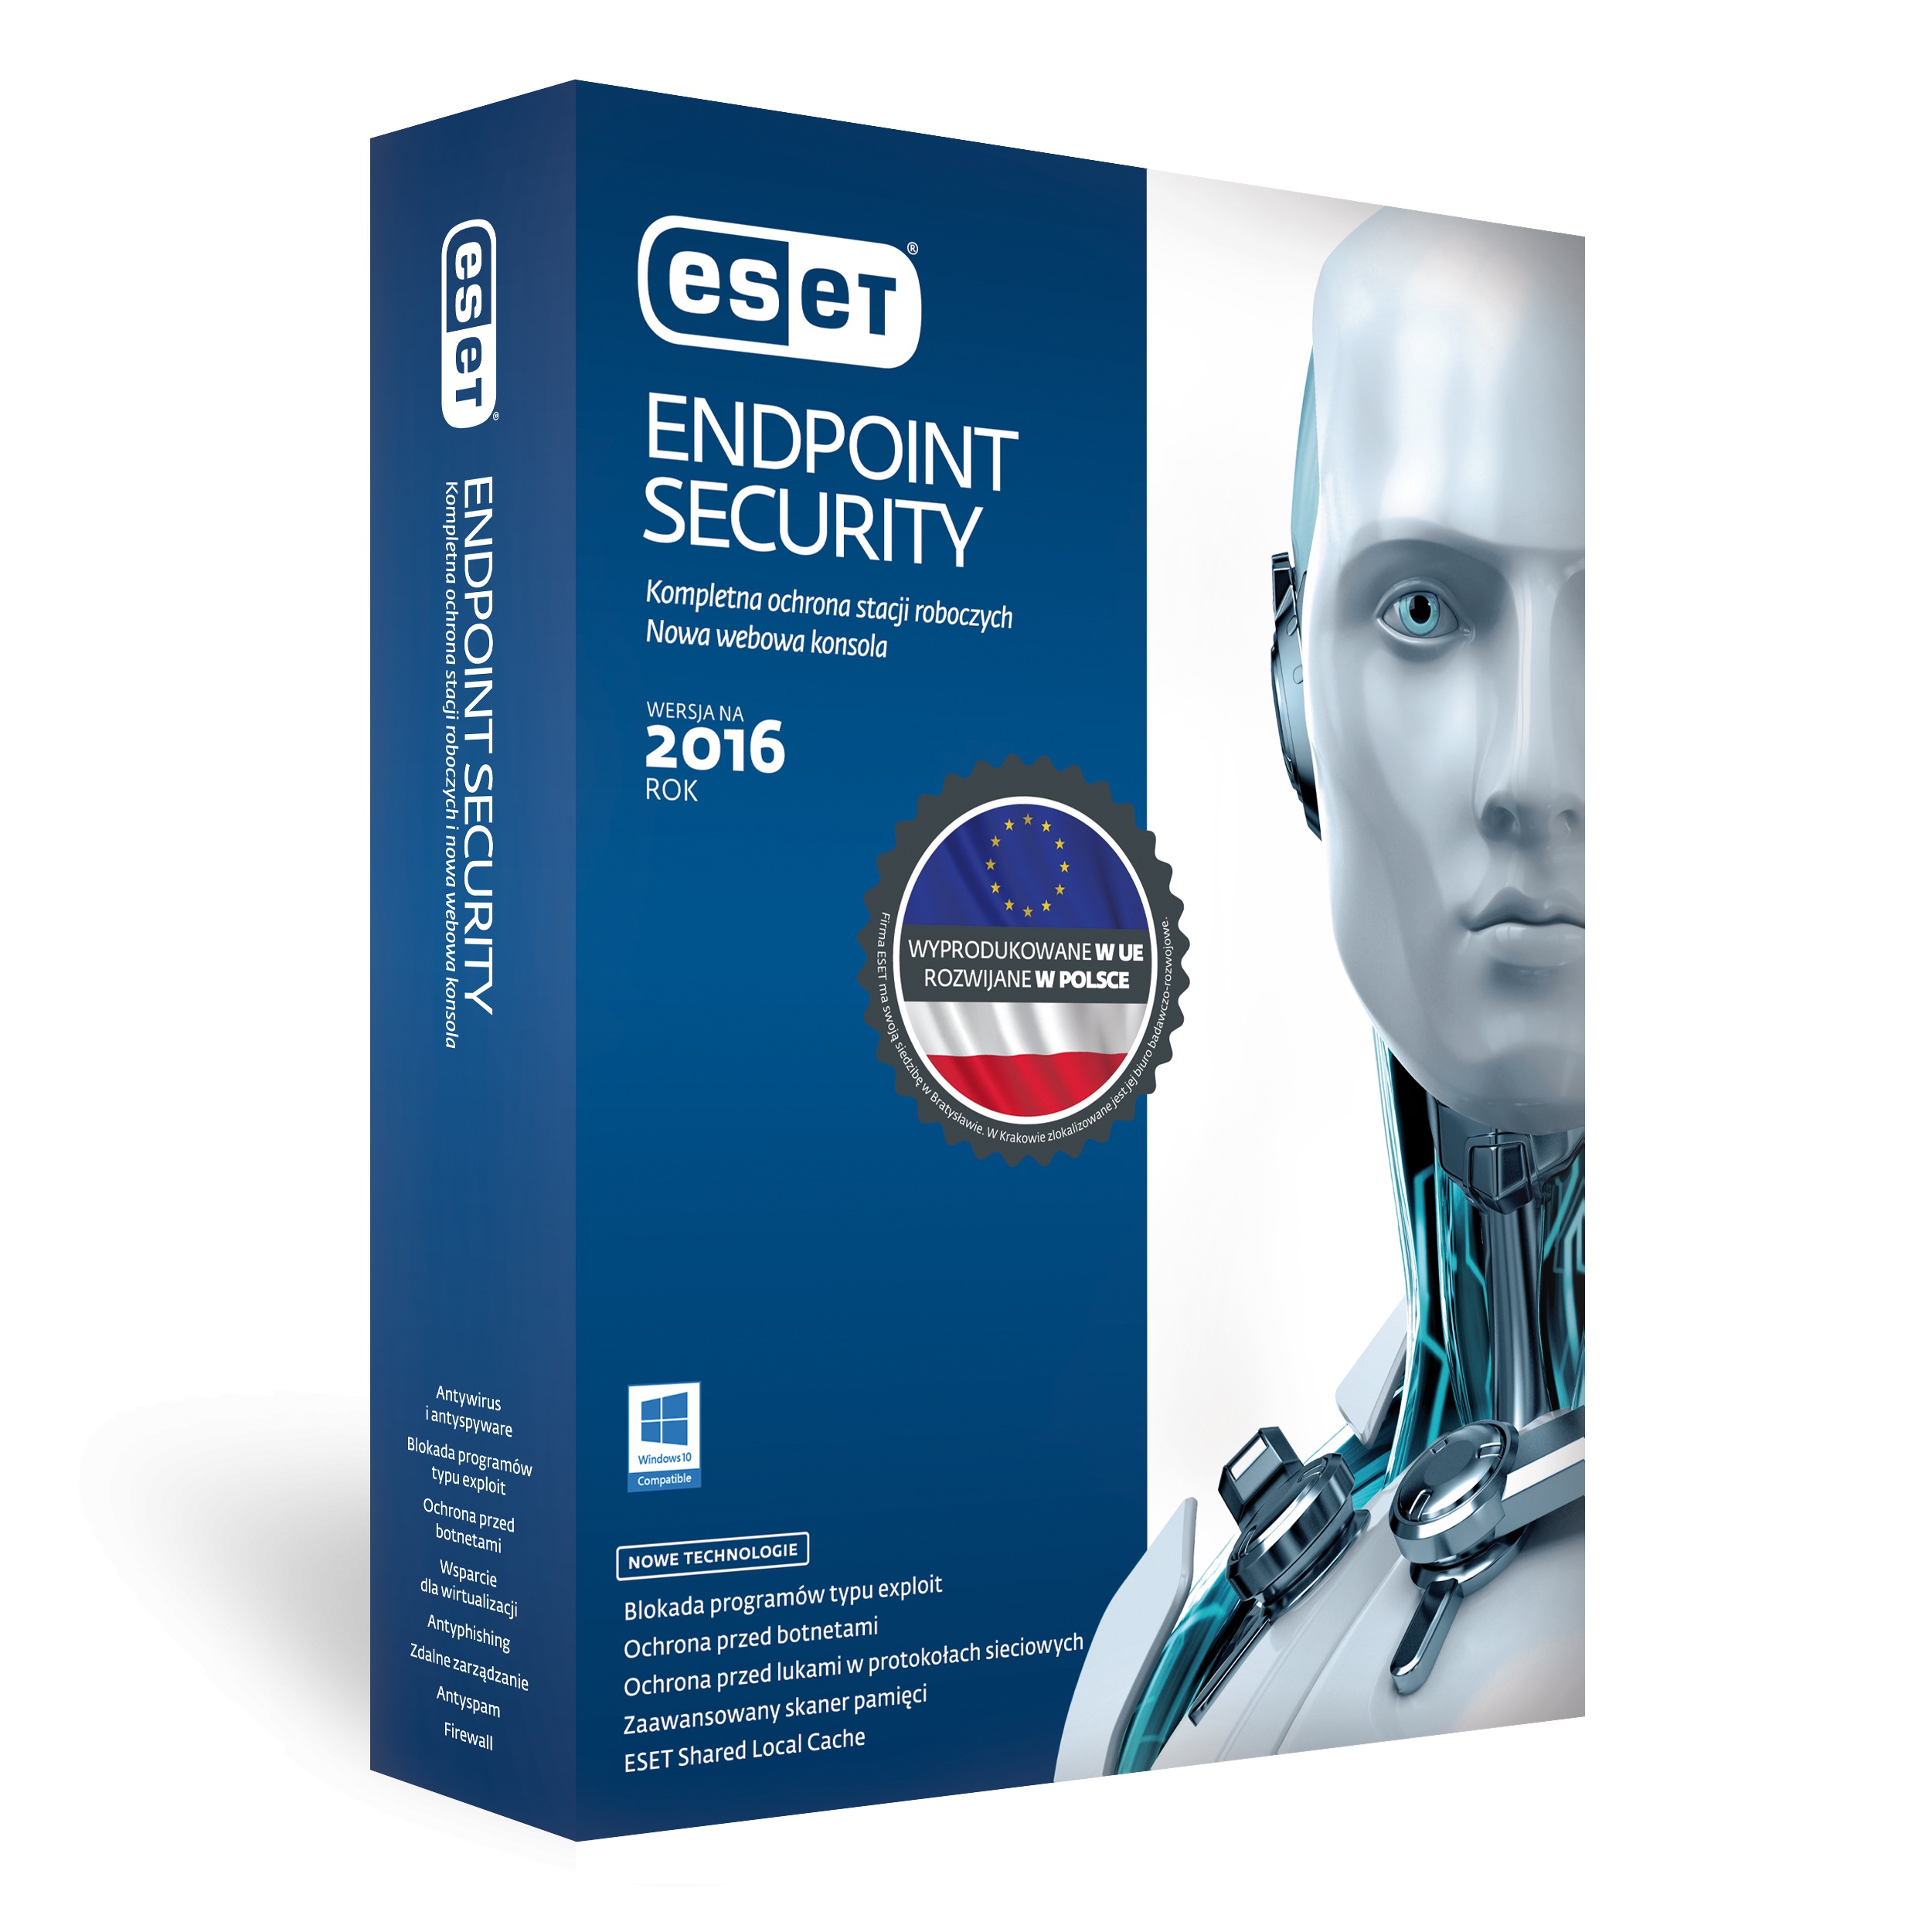 ESET Endpoint Security 10.1.2050.0 download the last version for ios